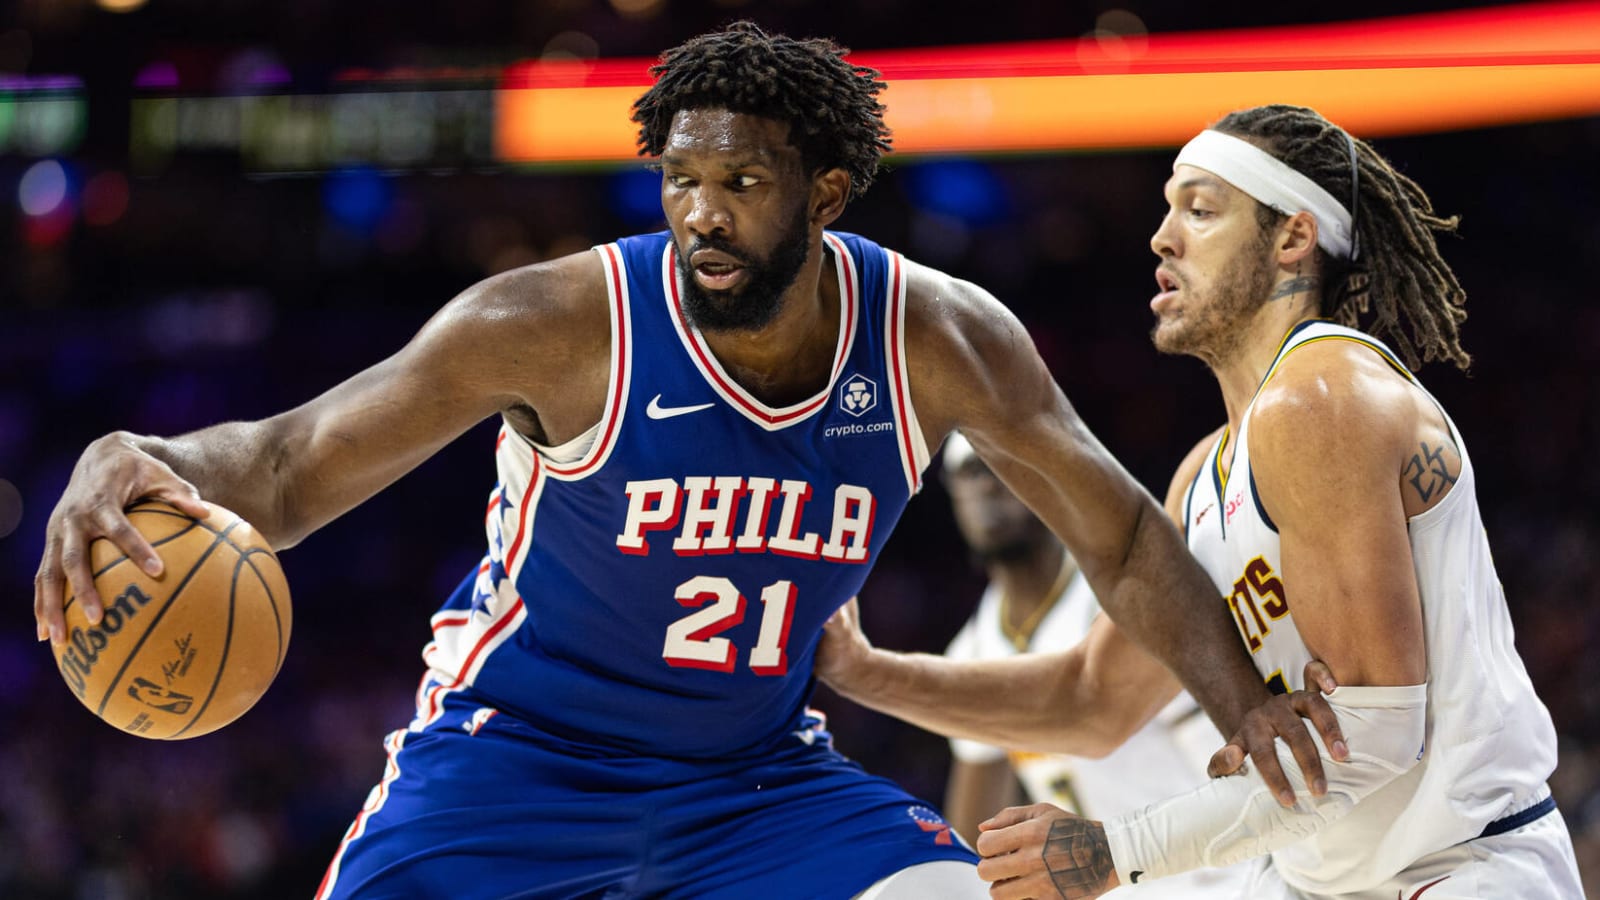 Watch: Joel Embiid puts Nuggets away with personal 10-0 run